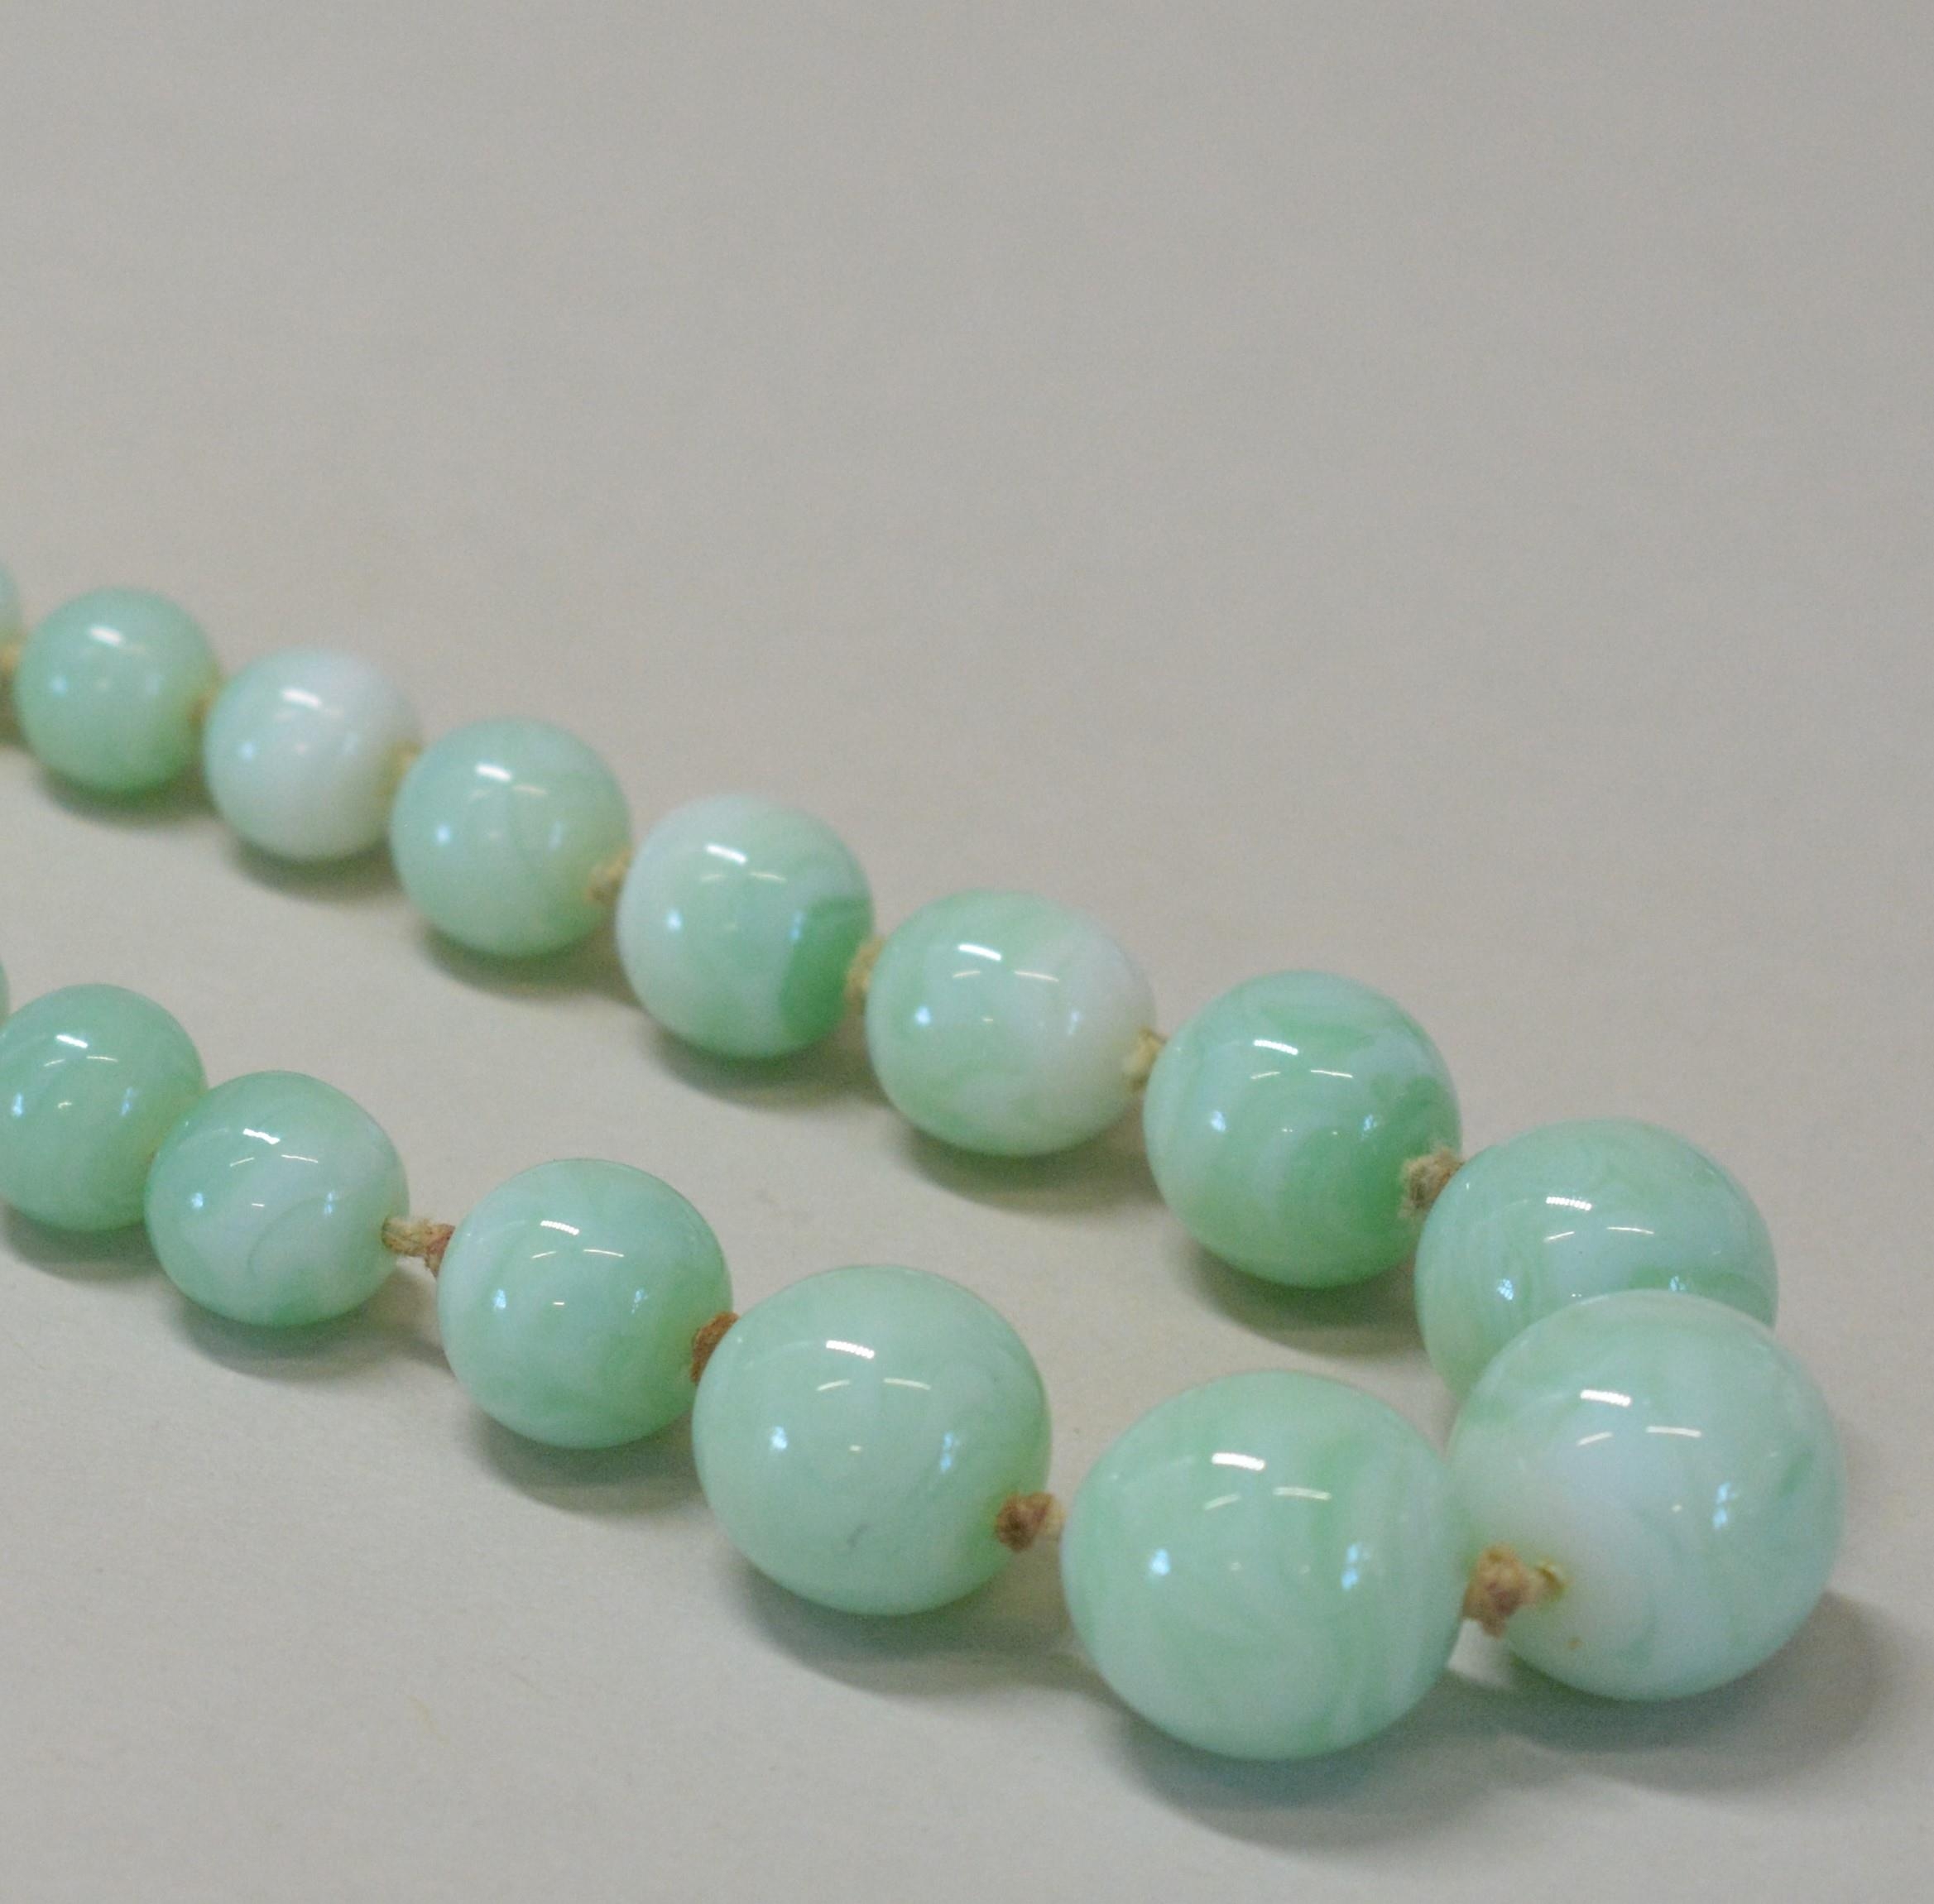 A GLASS IMITATION JADE BEAD NECKLACE Graduating green glass beads with silver bolt fastening. Weight - Image 2 of 2